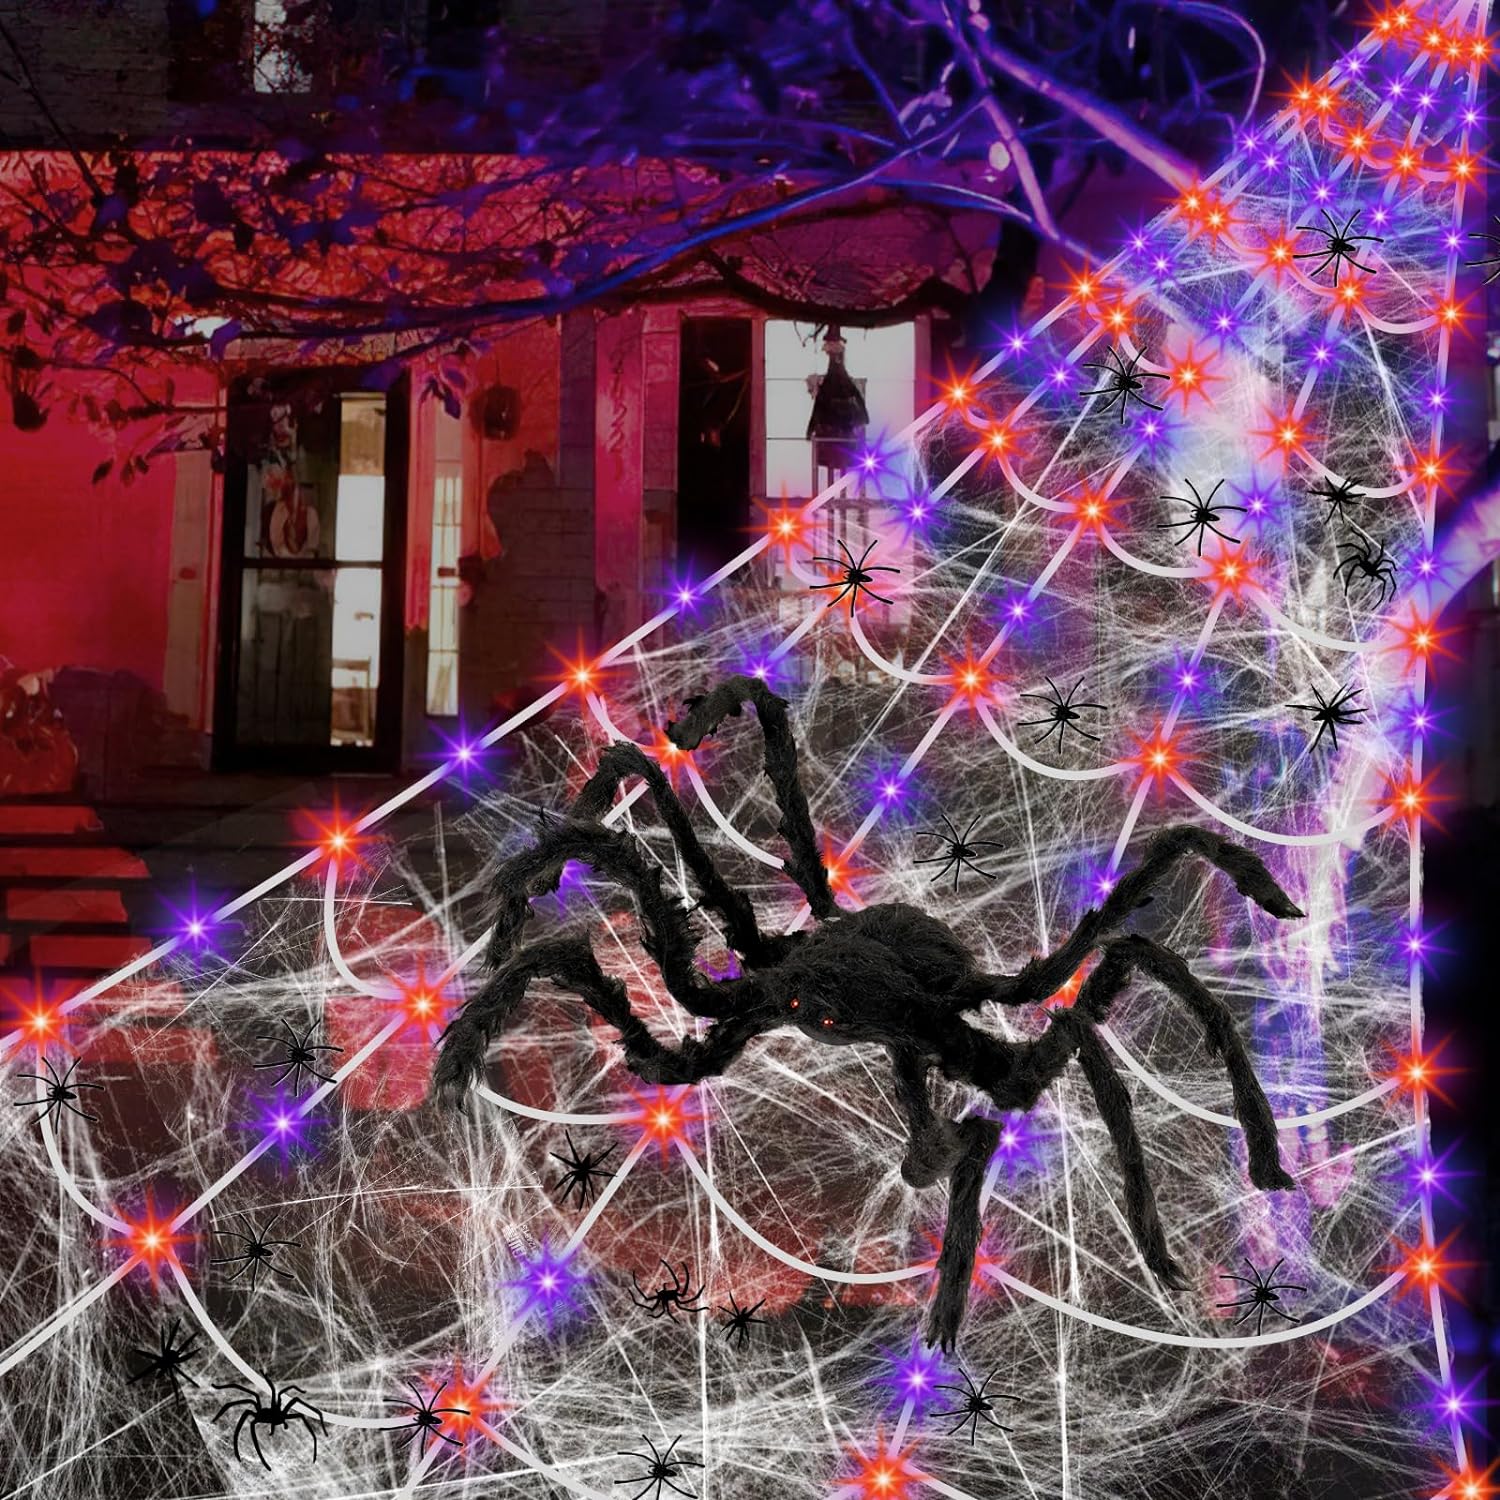 Spider Webs Halloween Decorations Outdoor Review - Discover Awesome ...